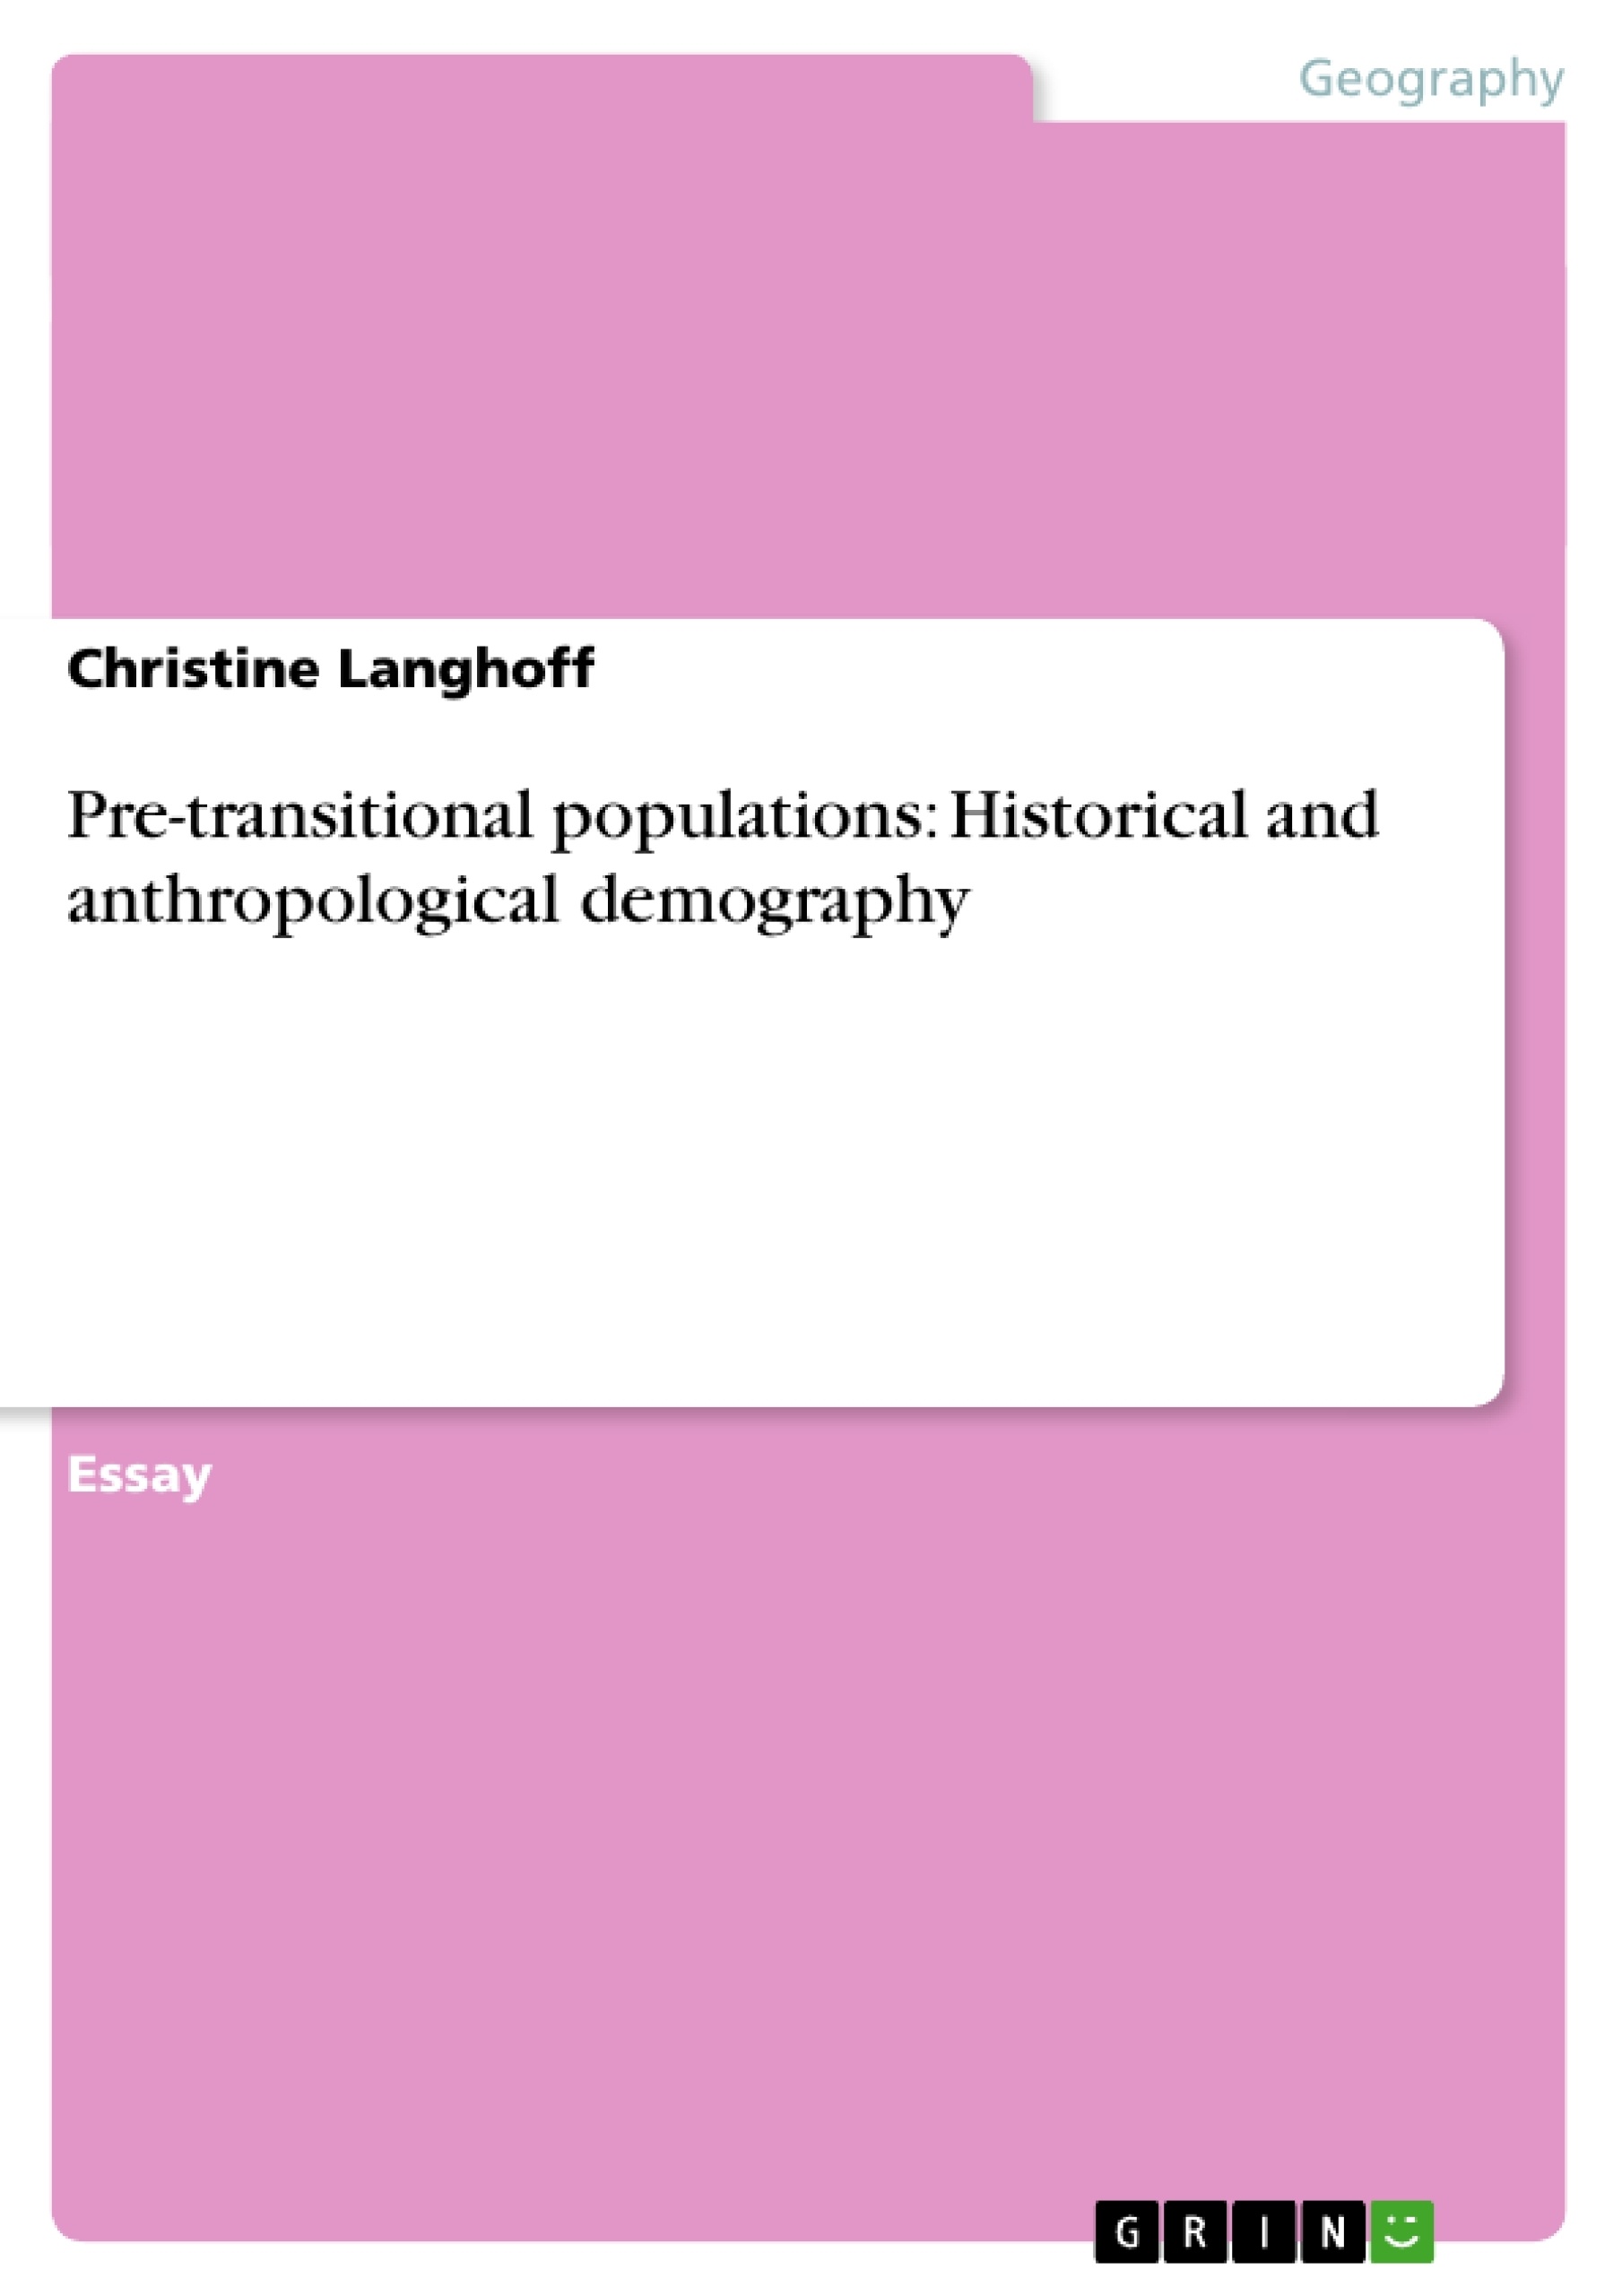 Título: Pre-transitional populations: Historical and anthropological demography